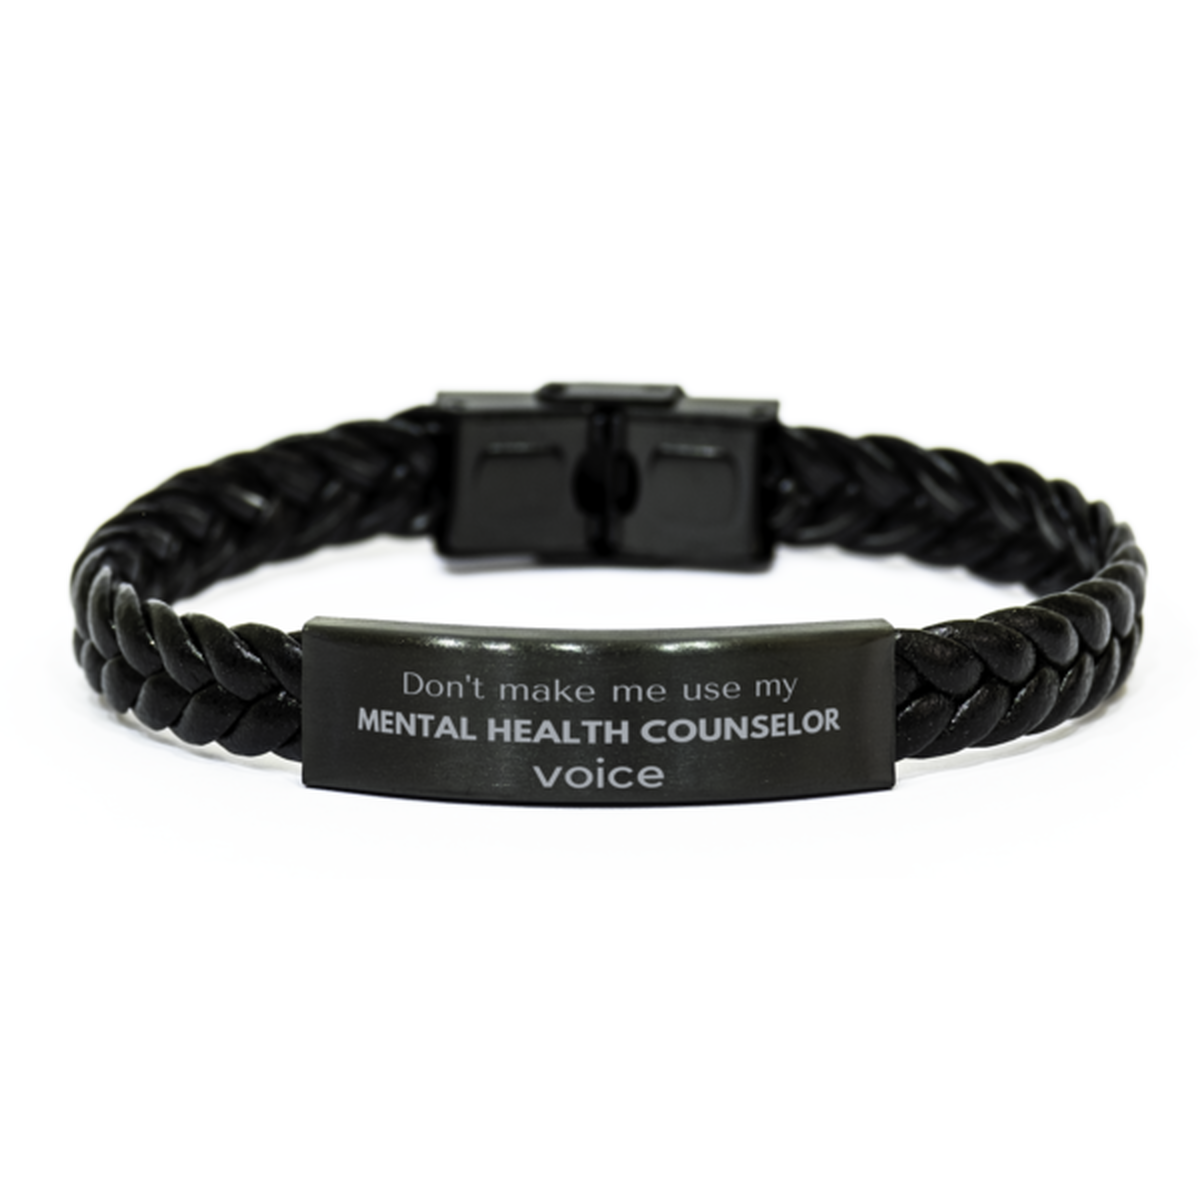 Don't make me use my Mental Health Counselor voice, Sarcasm Mental Health Counselor Gifts, Christmas Mental Health Counselor Braided Leather Bracelet Birthday Unique Gifts For Mental Health Counselor Coworkers, Men, Women, Colleague, Friends